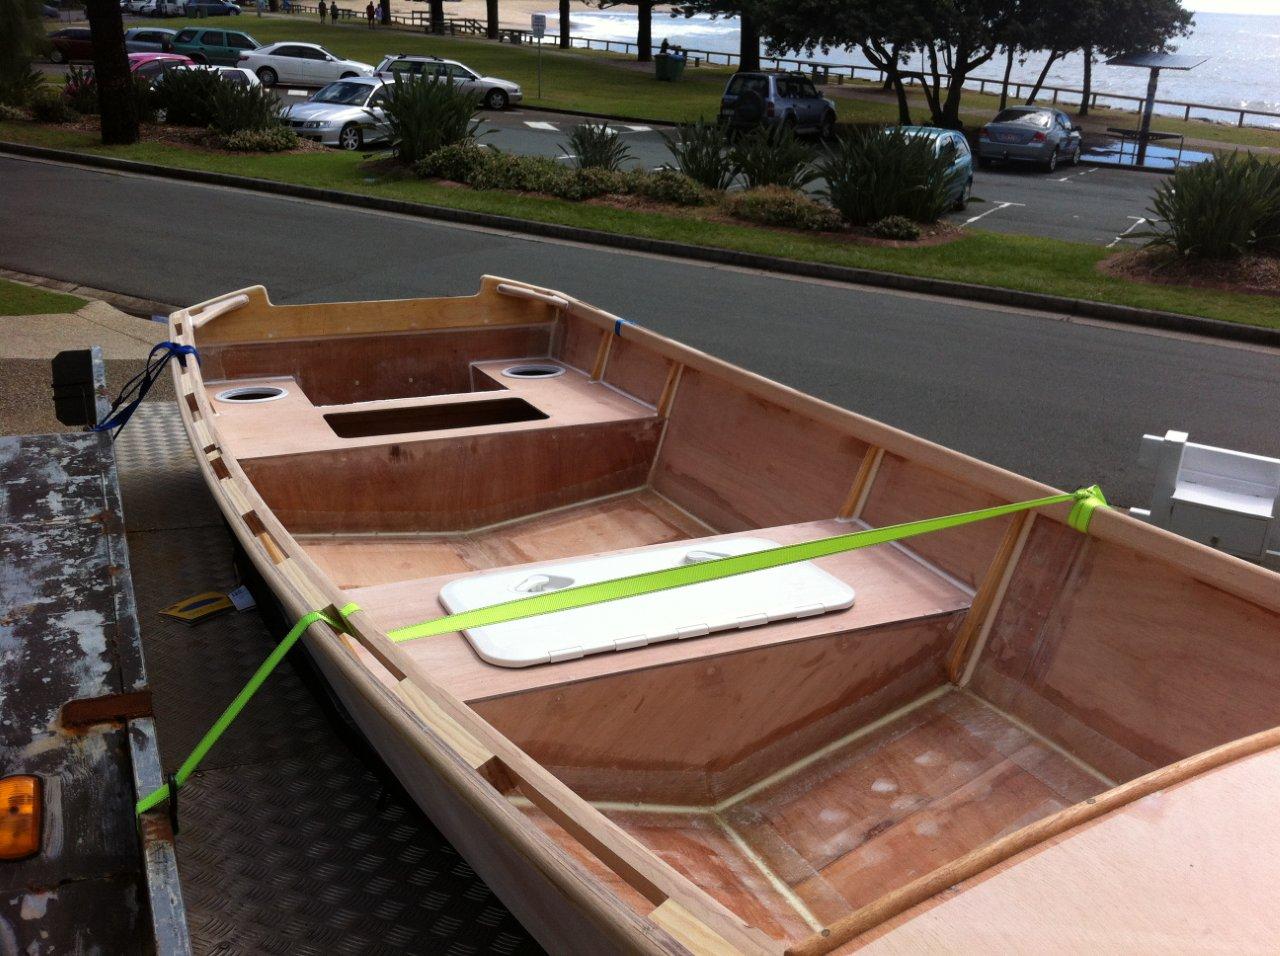 Ross Lillistone Wooden Boats: Update on Low-powered 